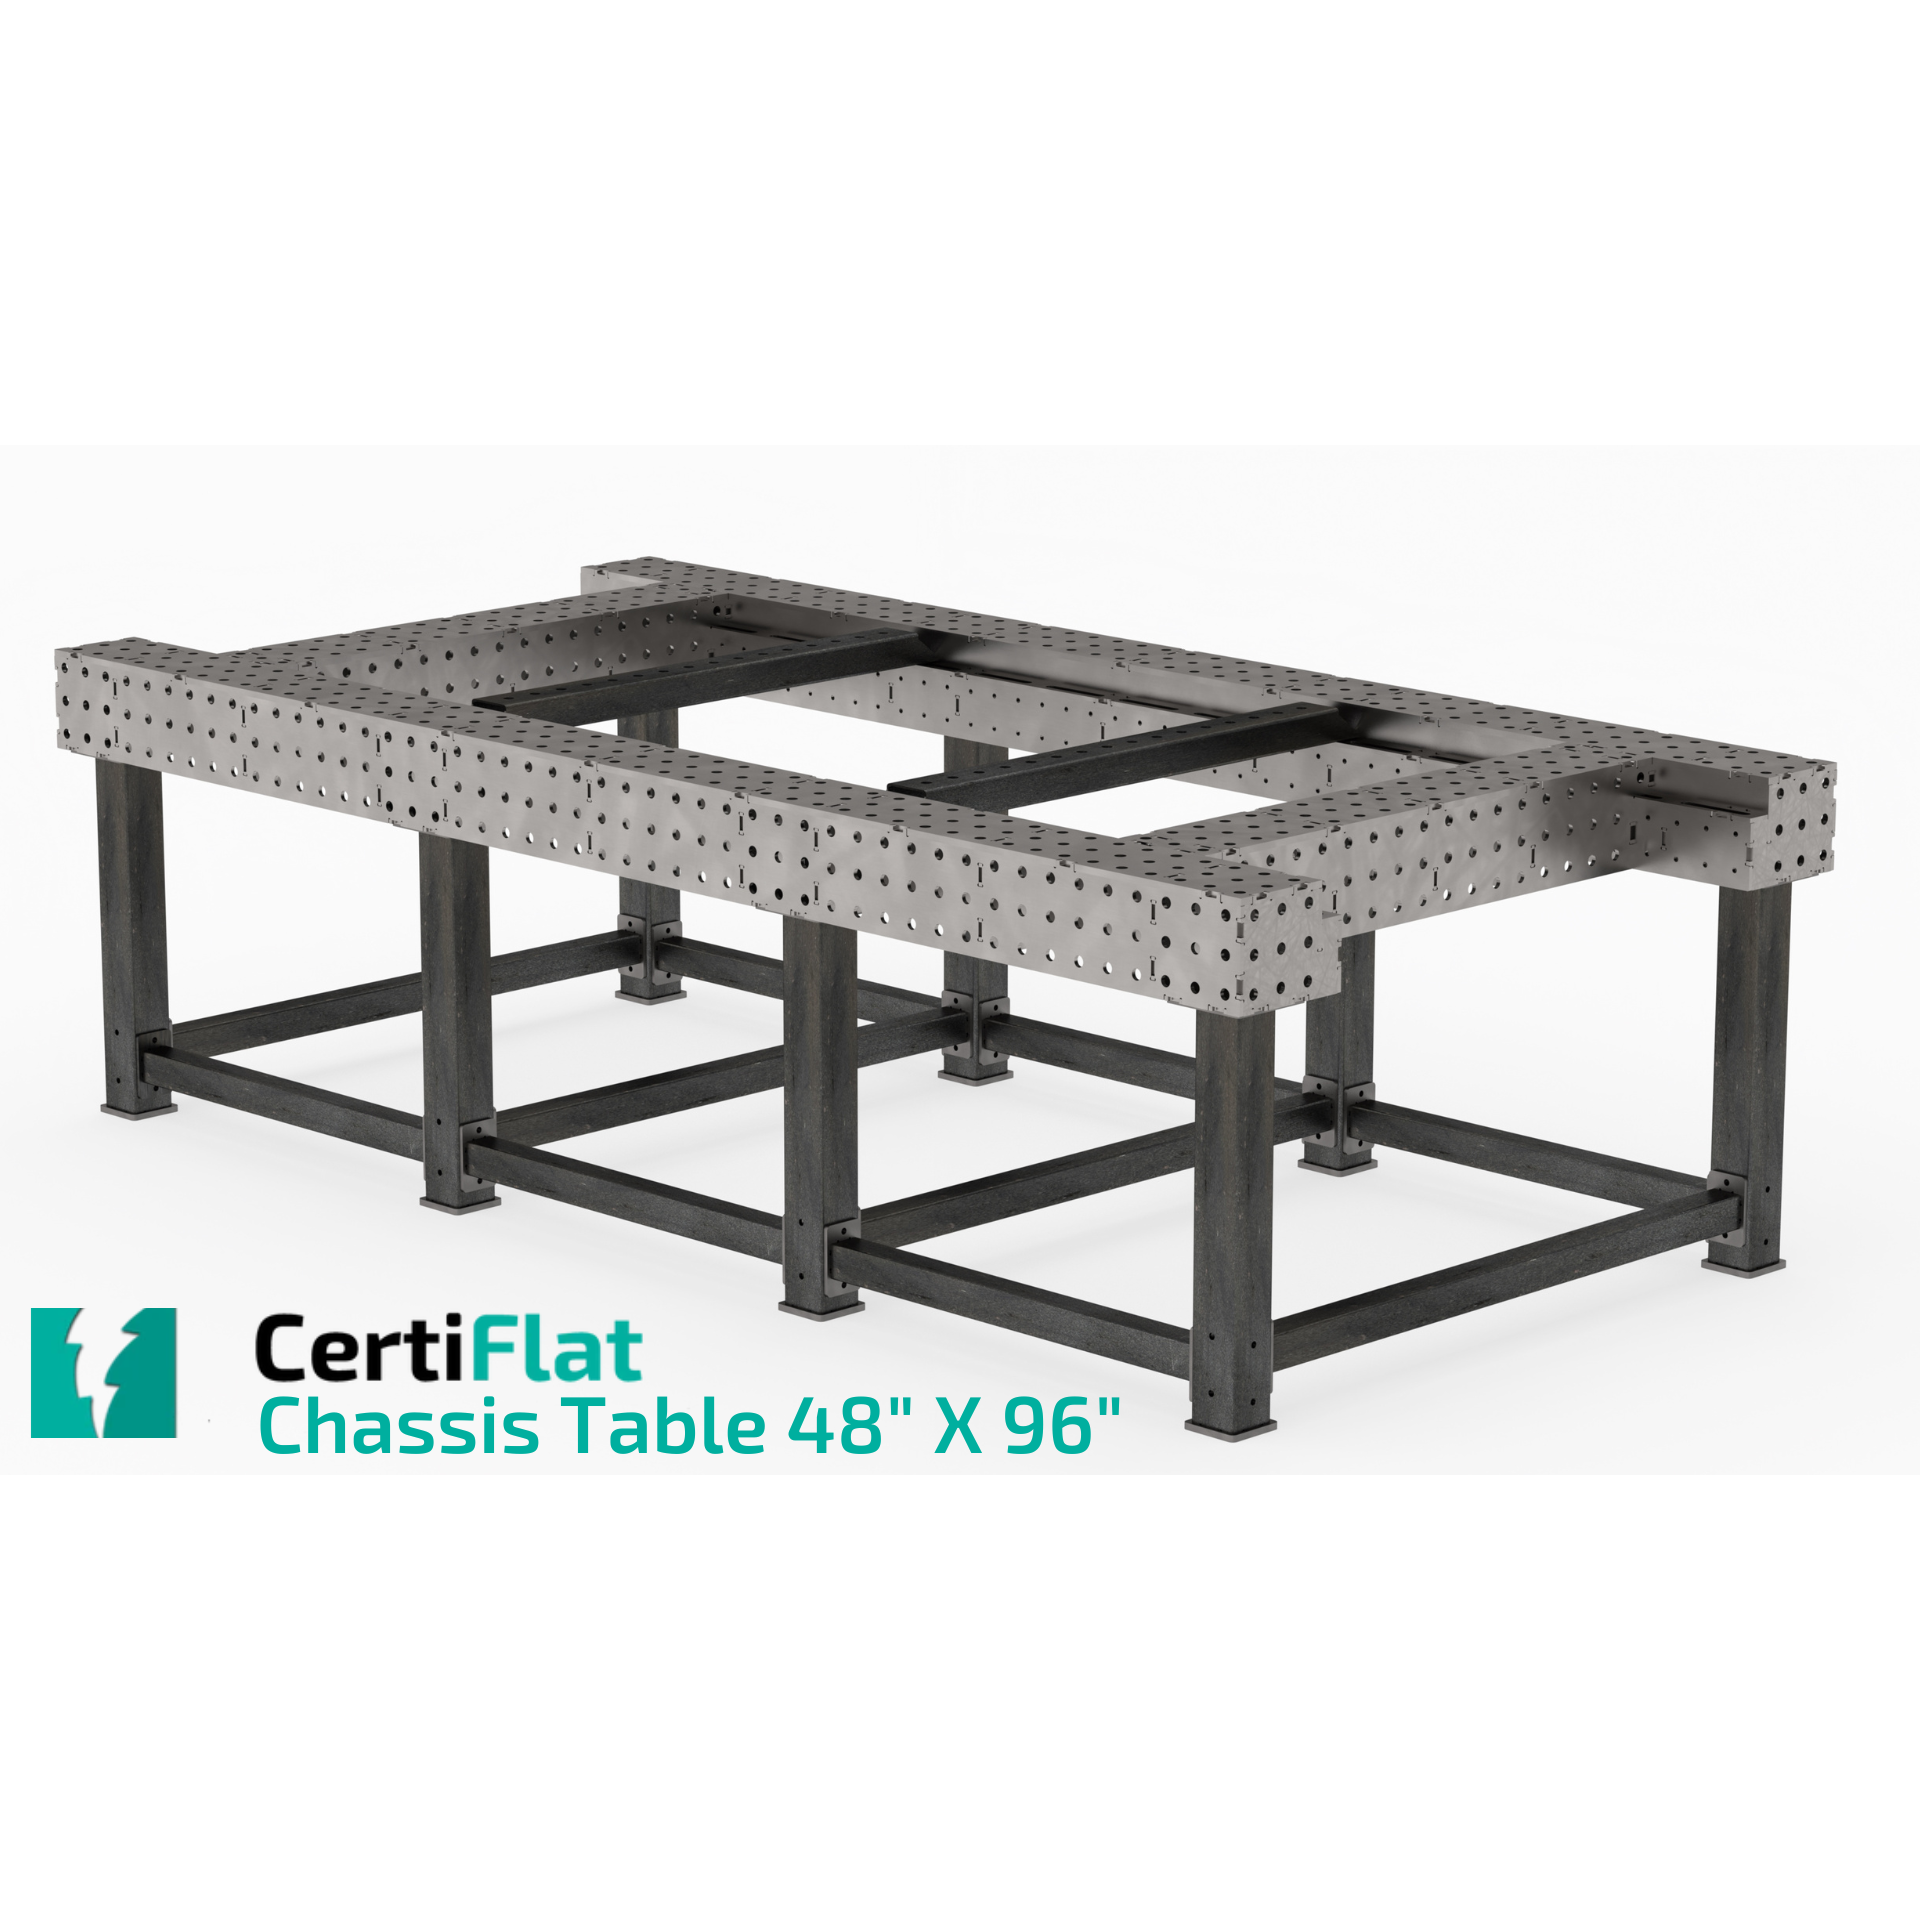 CertiFlat Chassis Table 48" X 96", Fabrication Table Heavy Duty